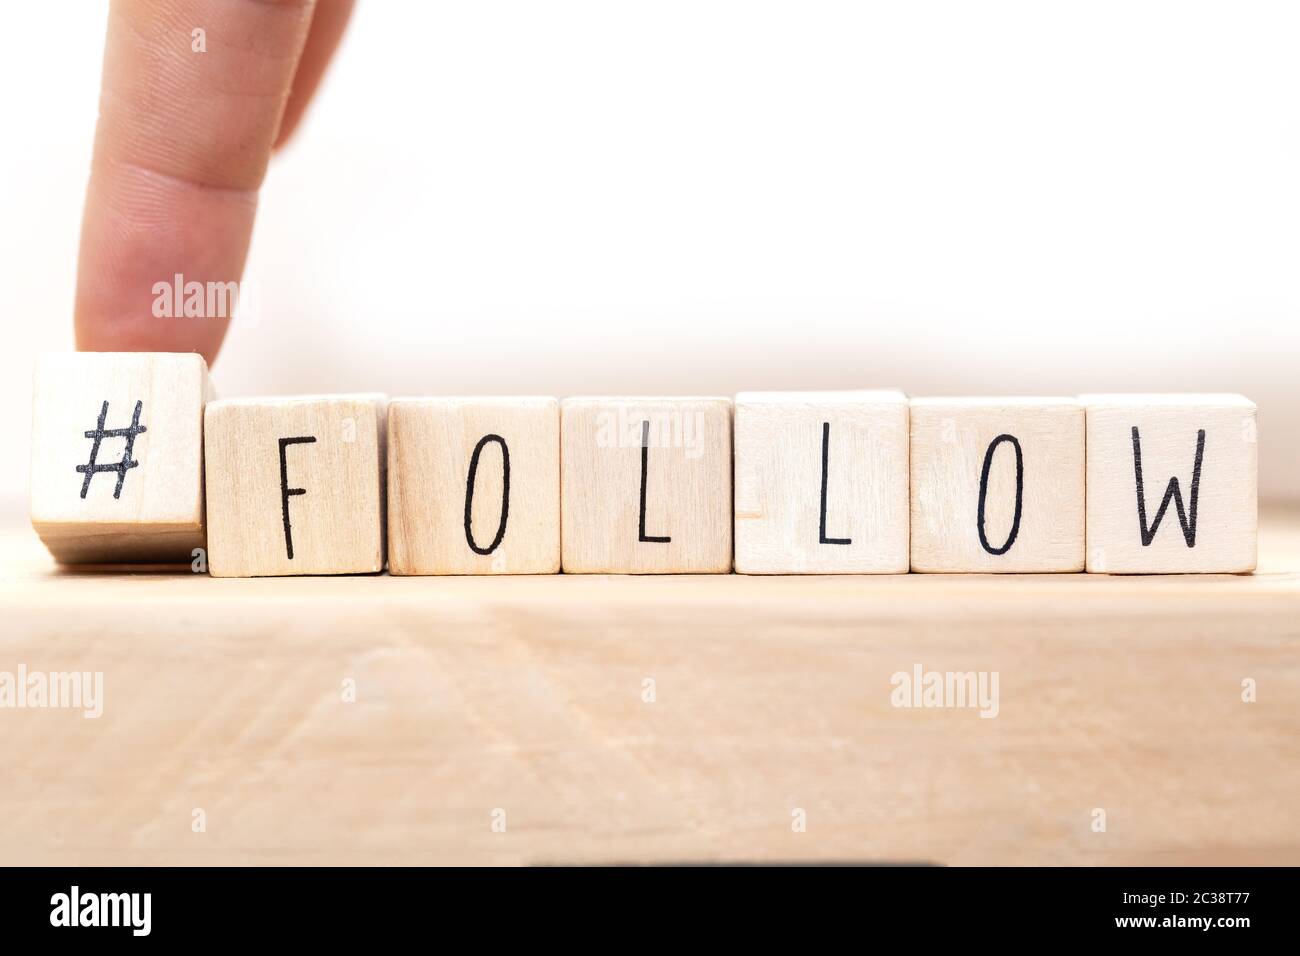 Follow sign made of cubes on a wooden table with Hashtag near white background, socialmedia concept close-up Stock Photo